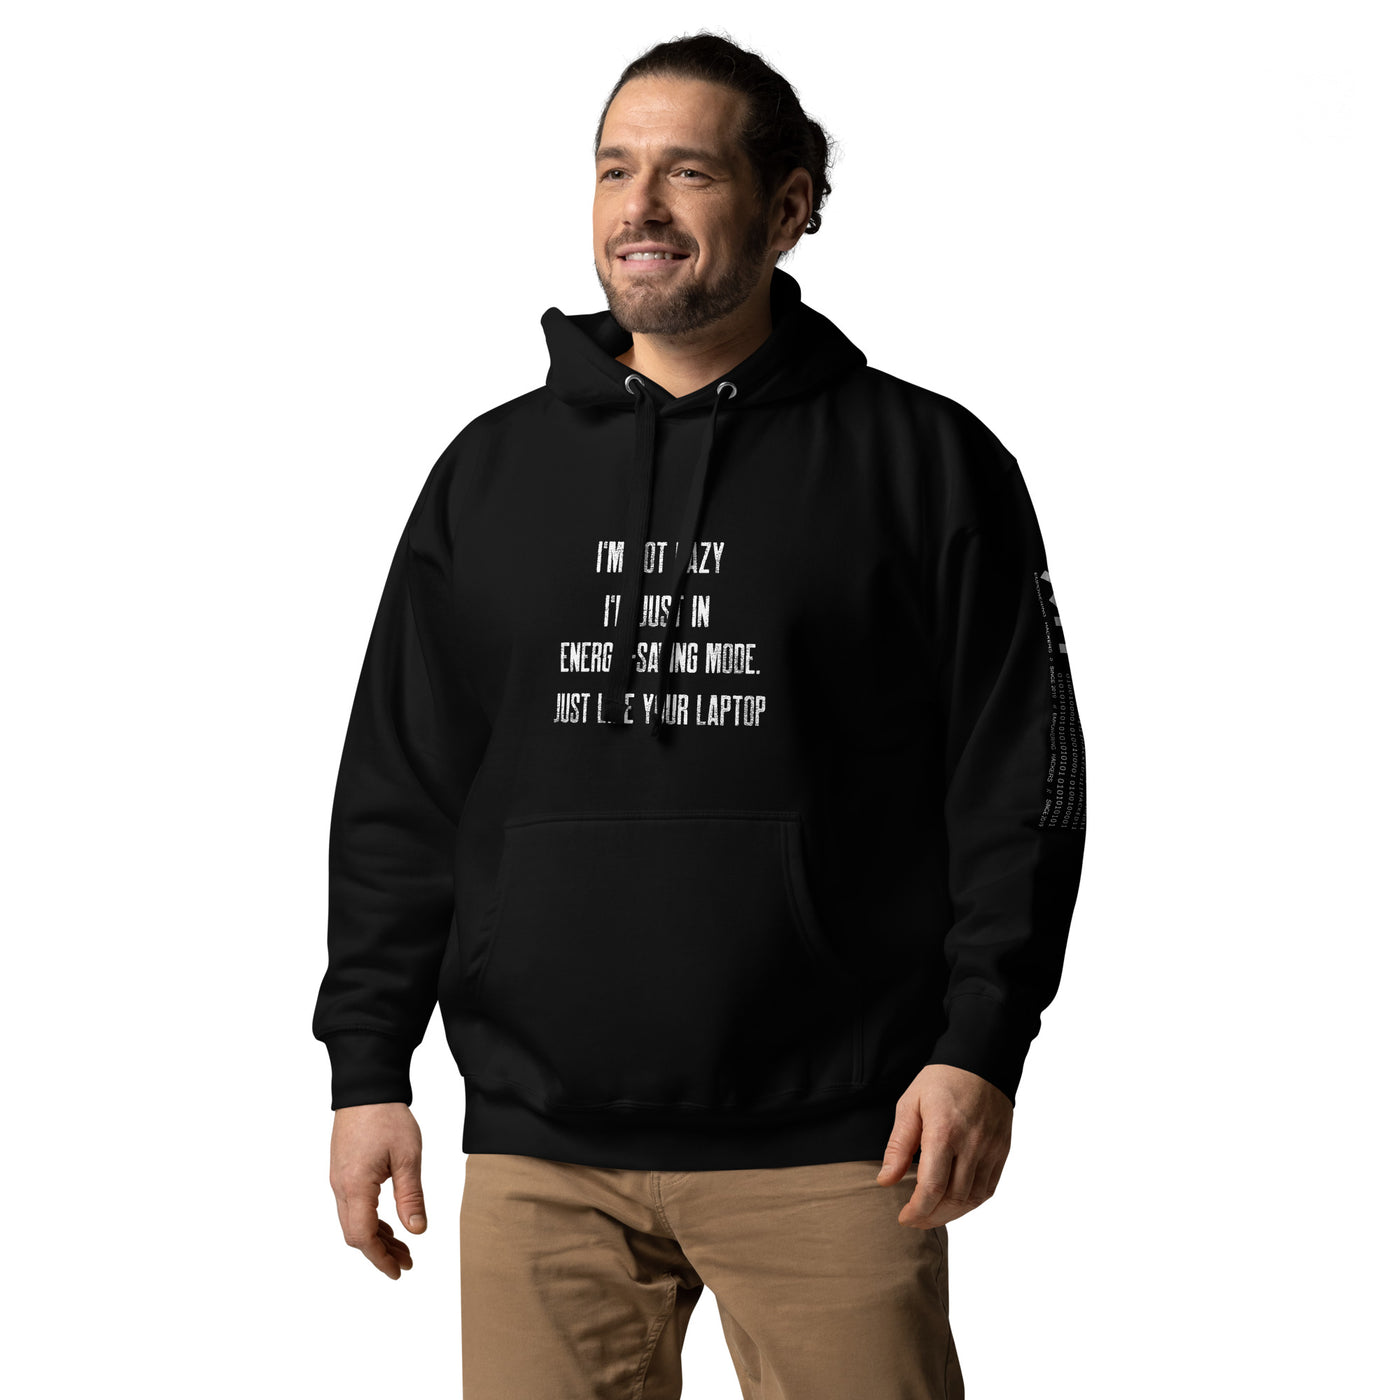 I am not lazy, I am in Energy-Saving Mode, Just like your laptop V1 - Unisex Hoodie